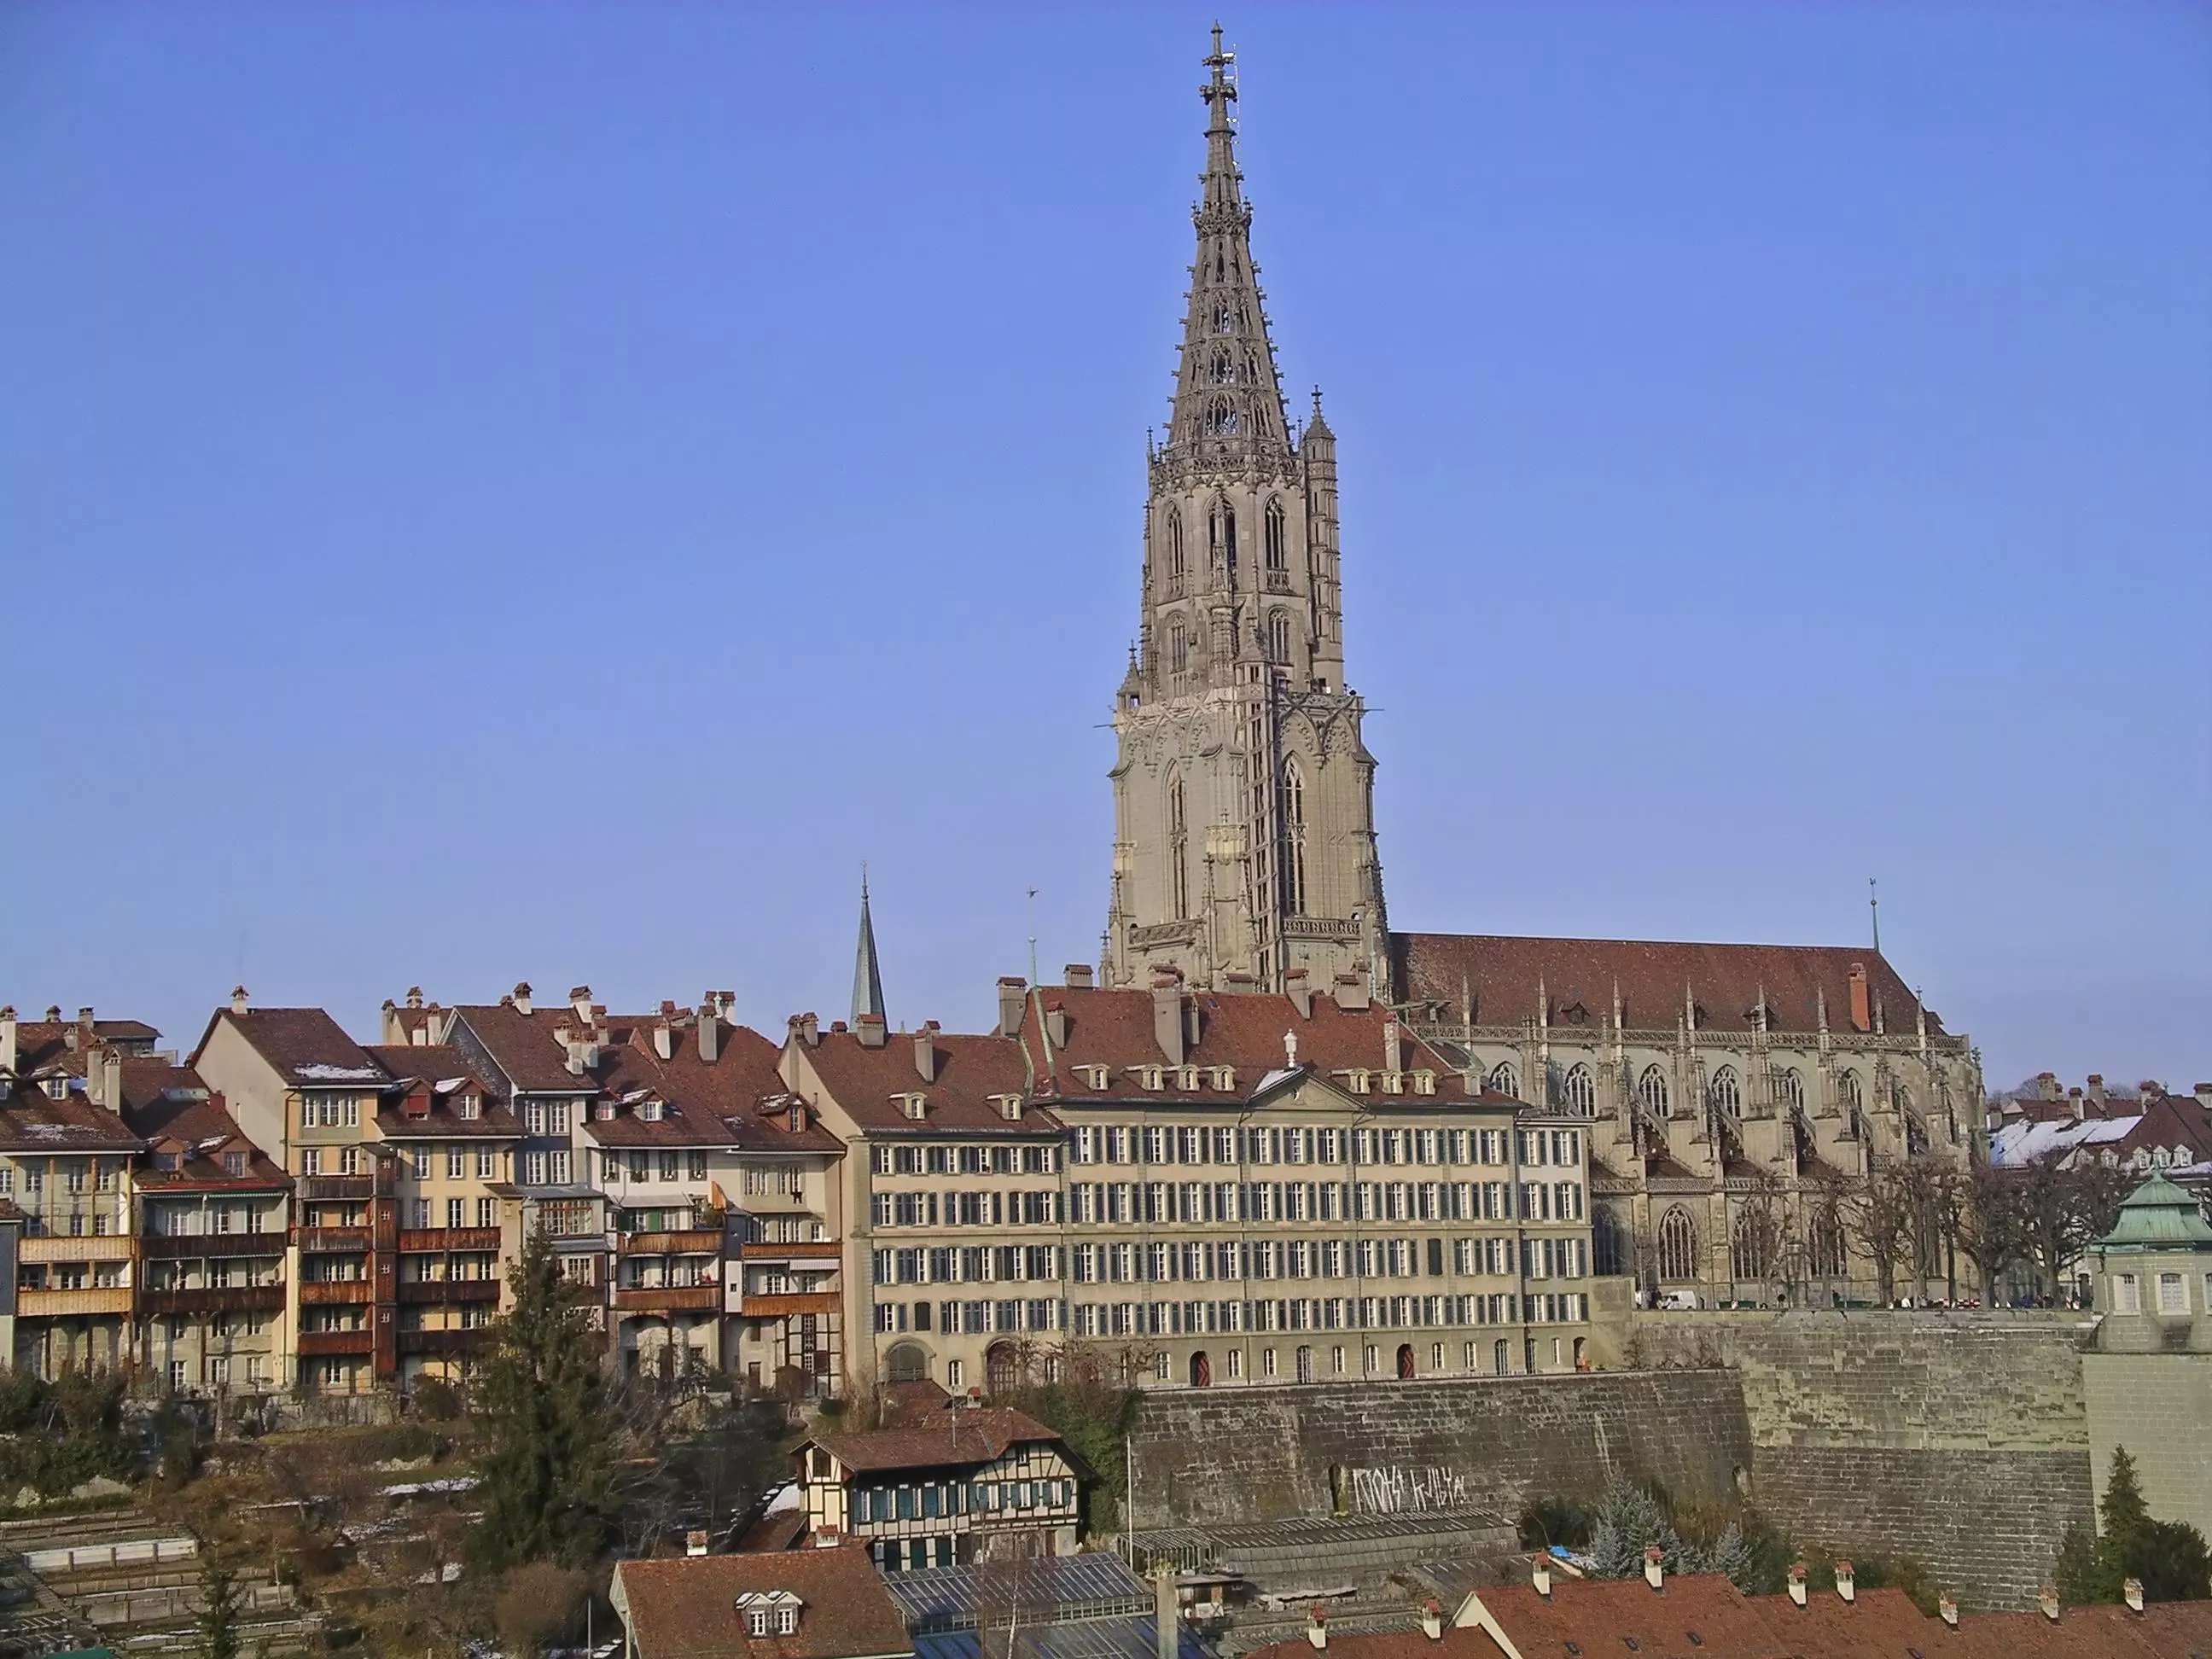 Berne Cathedral in Switzerland, Europe | Architecture - Rated 3.8